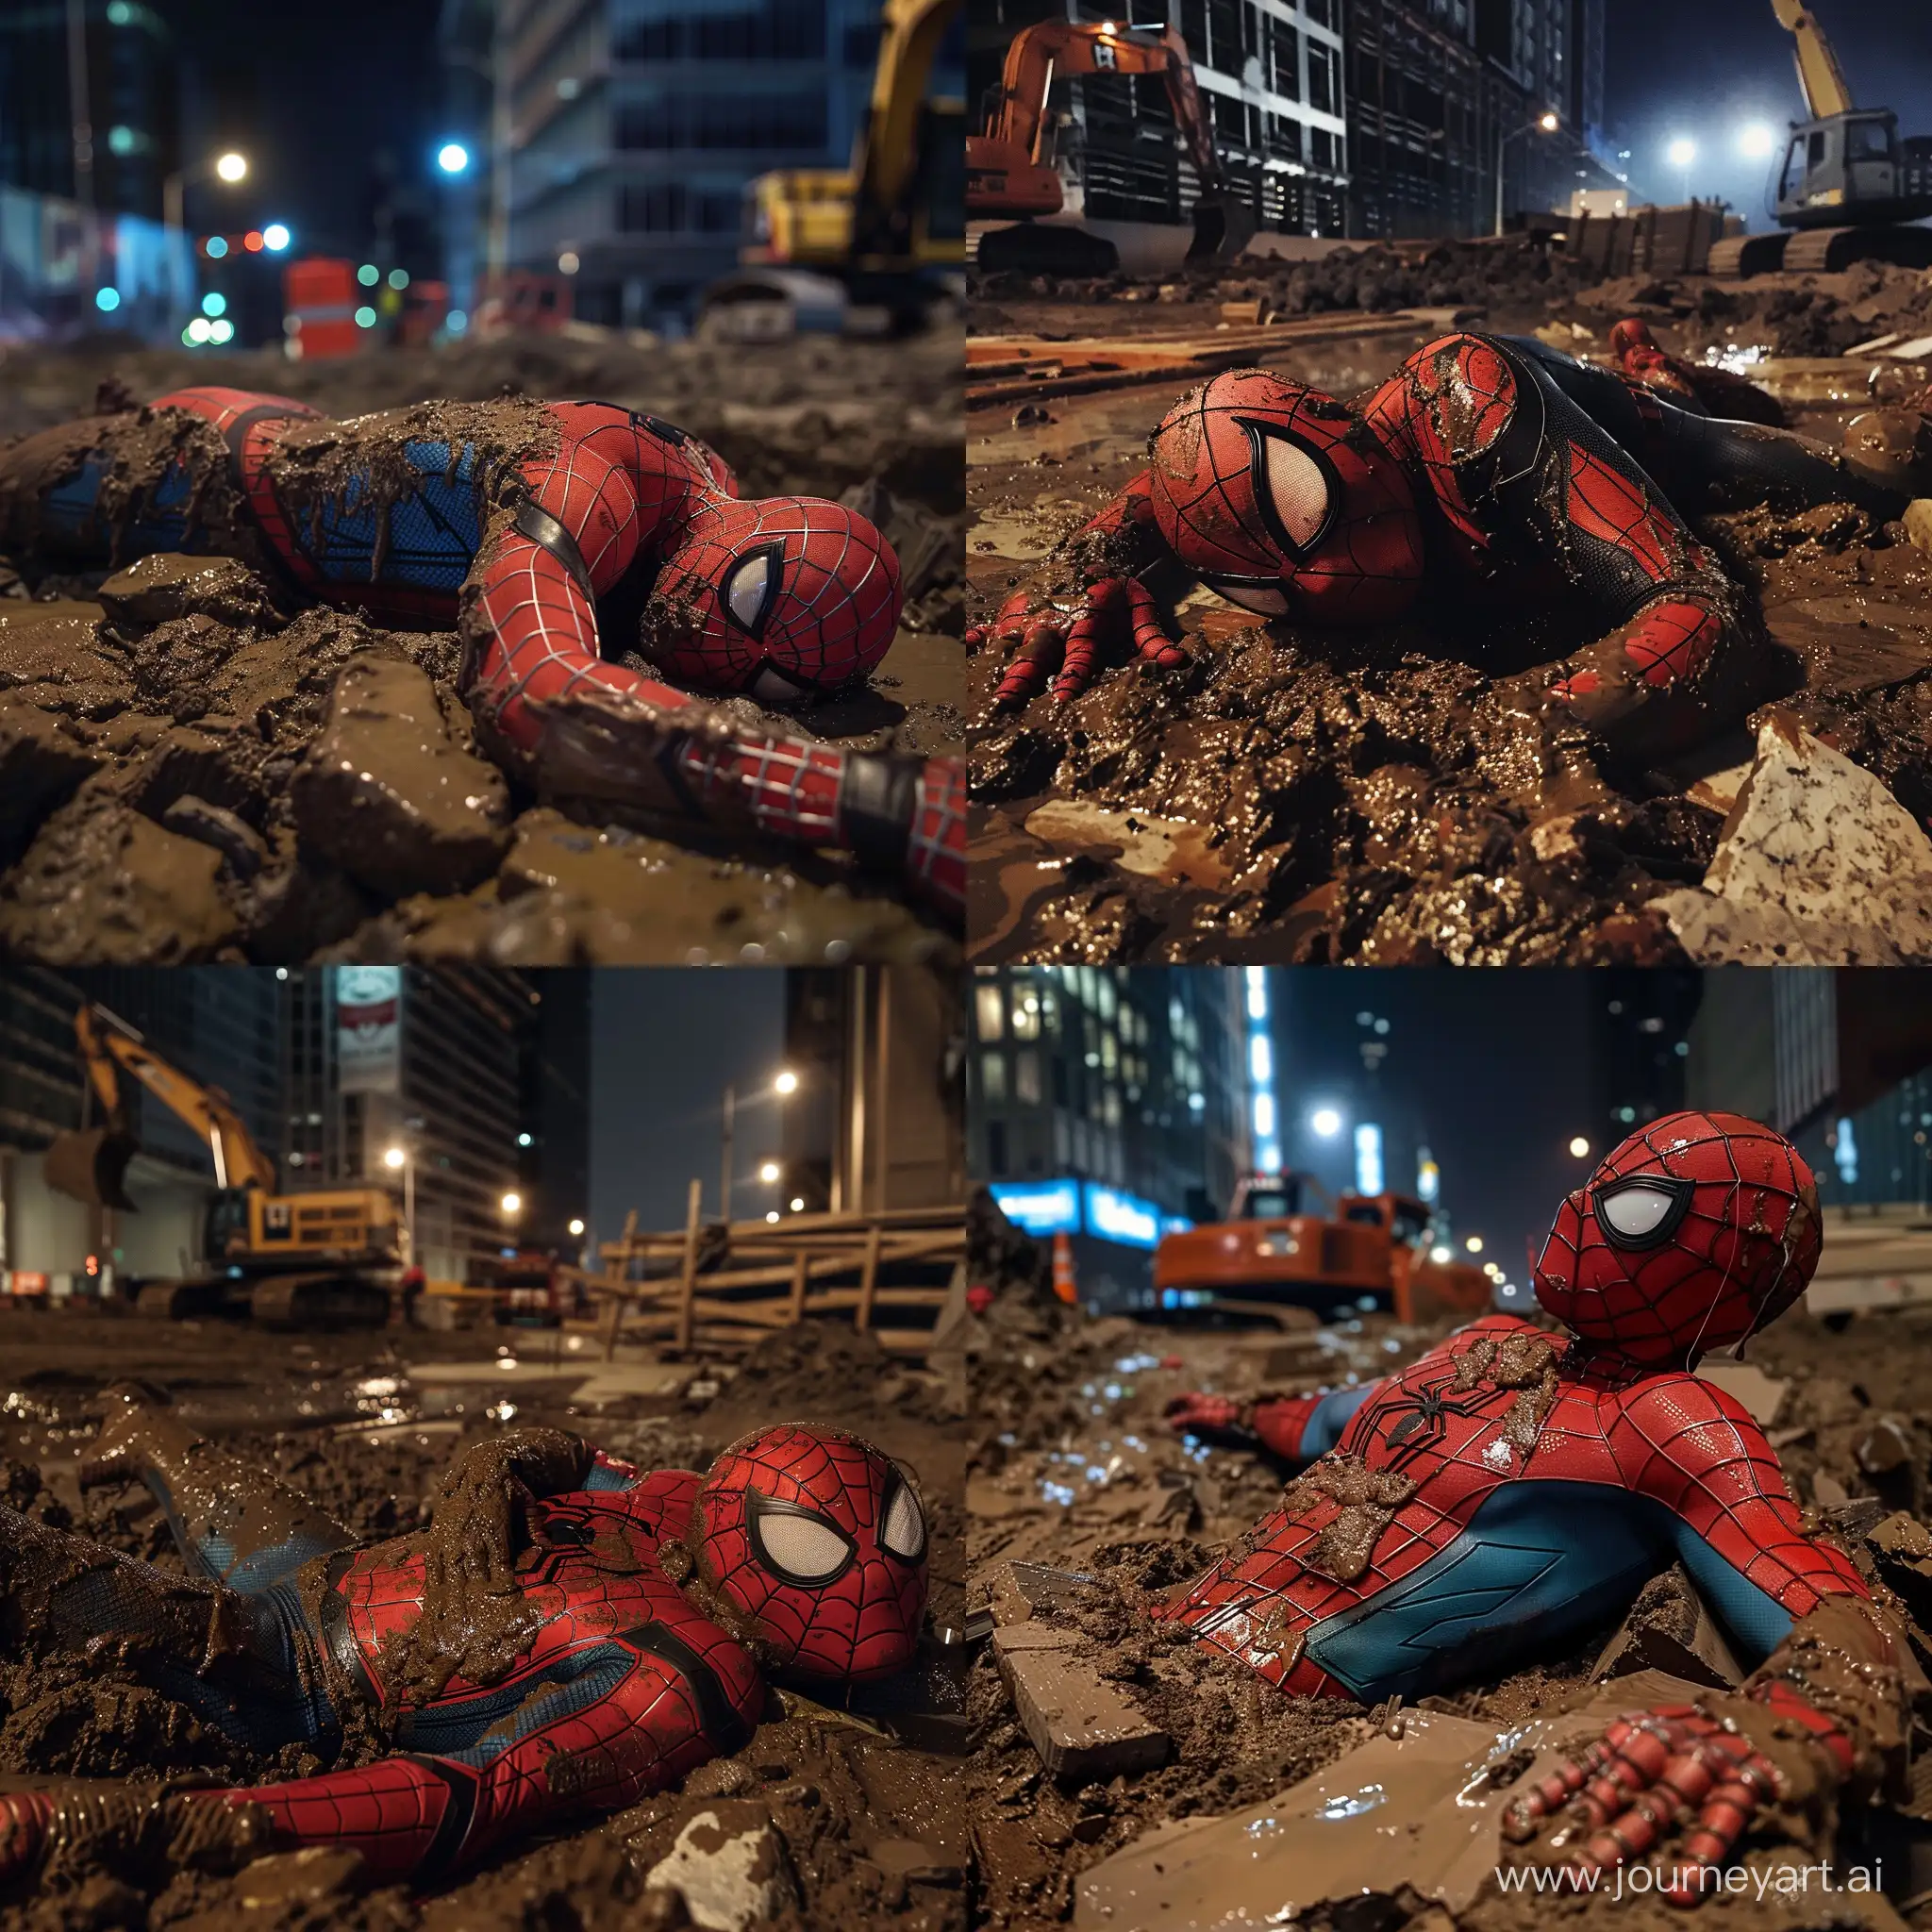 spiderman passed out covered in mud at a construction site at night